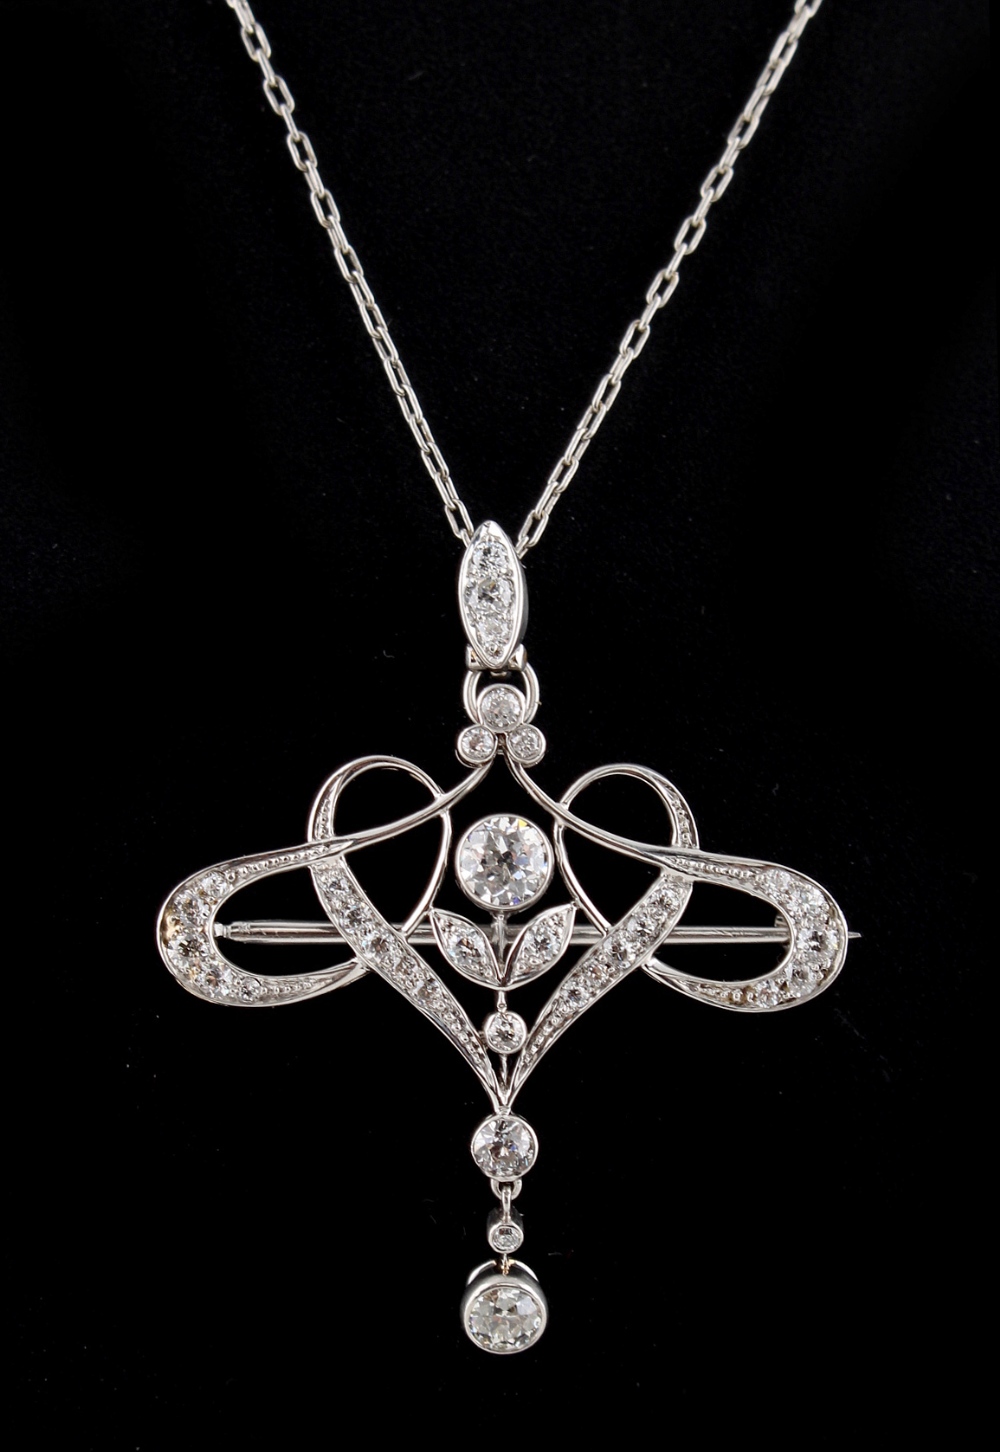 A Tiffany & Co. Belle Epoque diamond openwork brooch or pendant, on associated chain necklace,